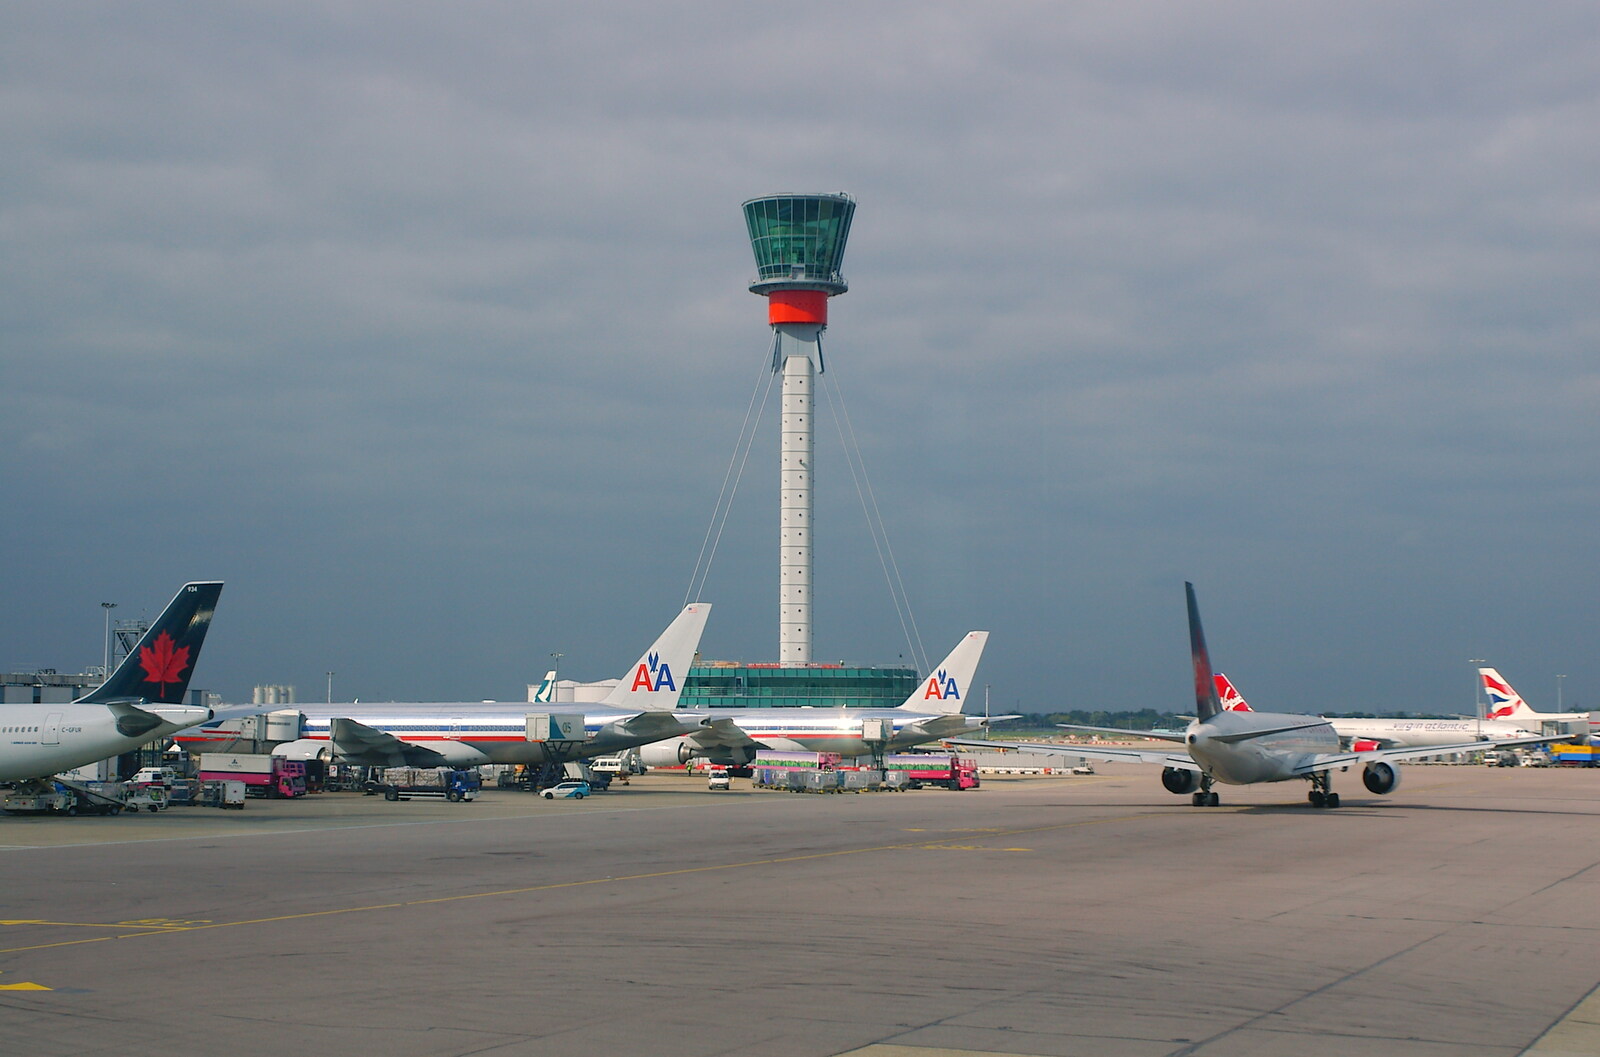 A bunch of heavies under Heathrow control tower from San Diego Four, California, US - 22nd September 2005